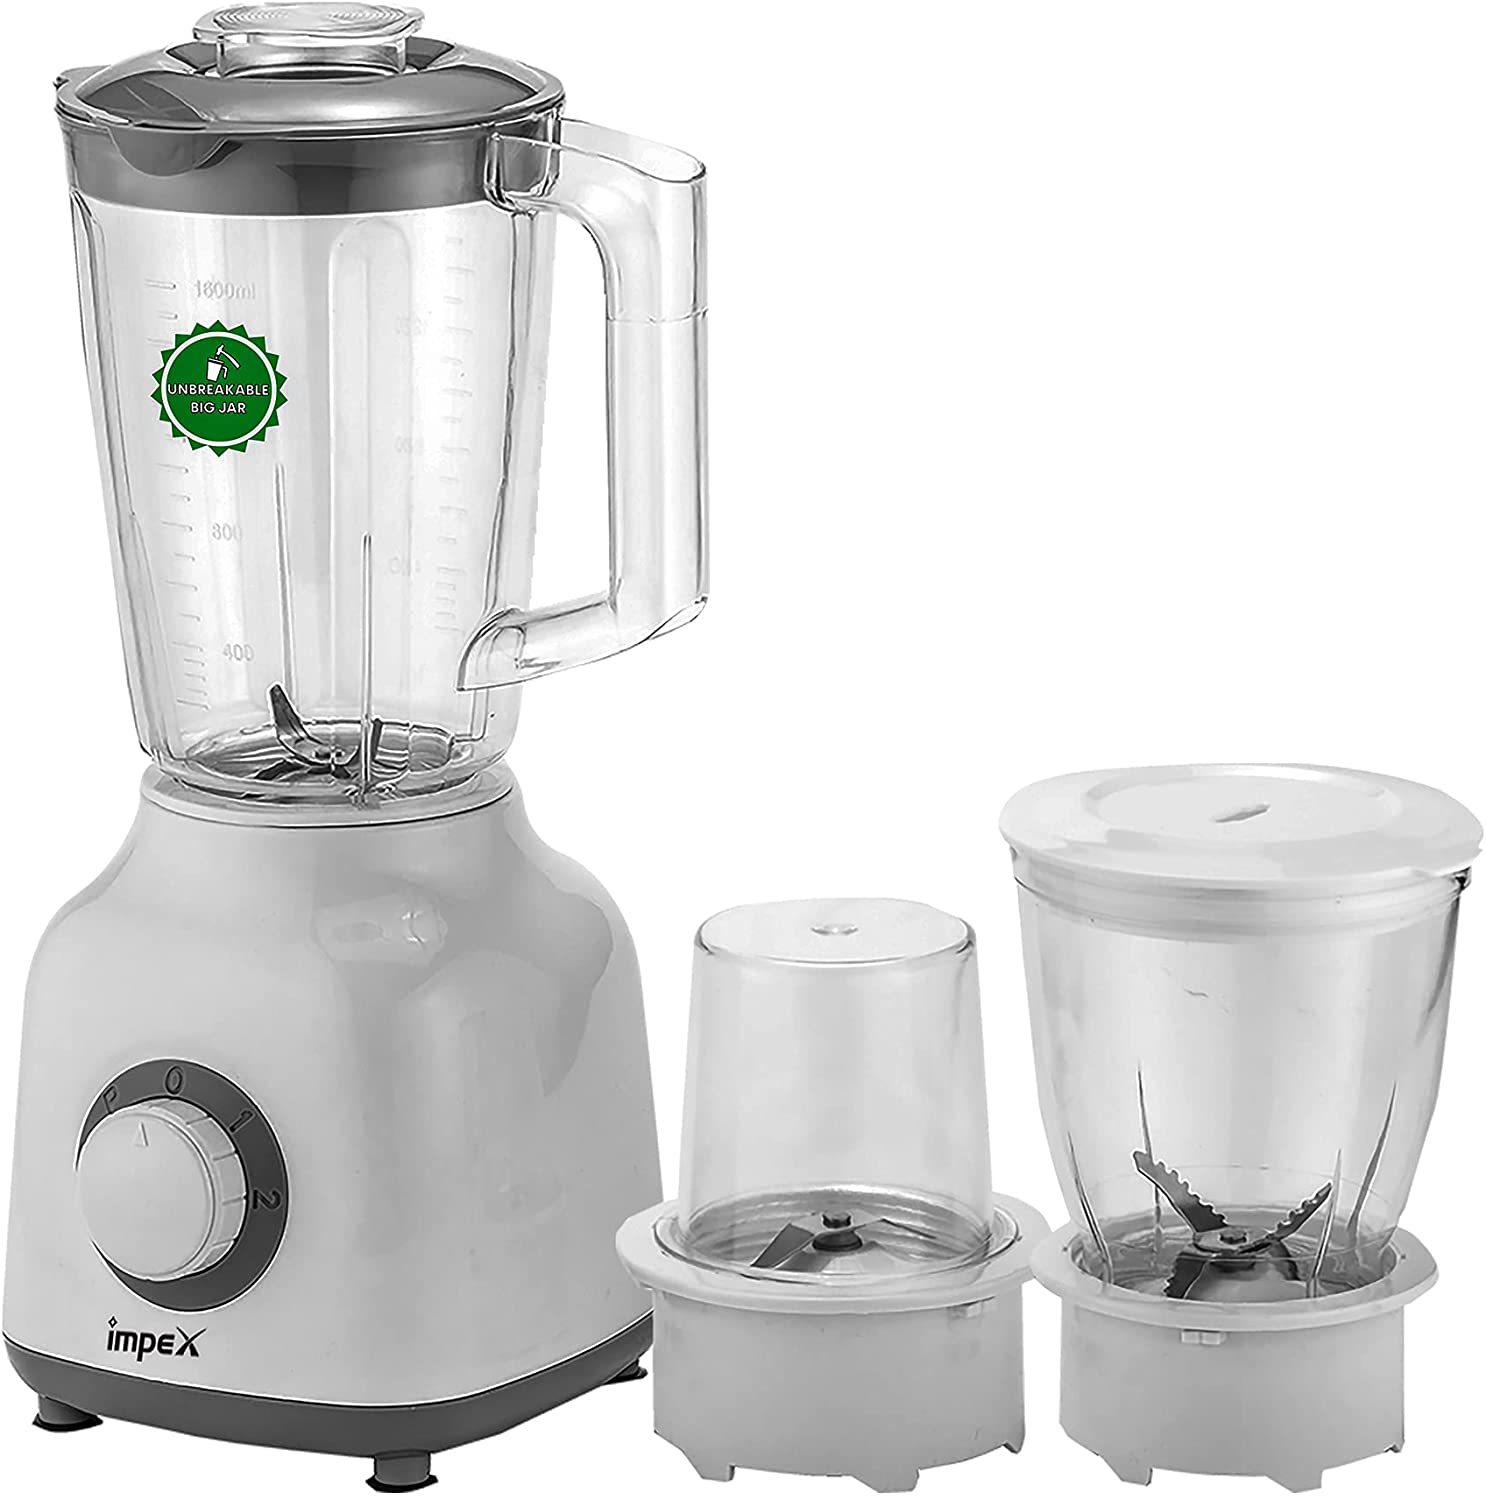 Impex BL 3503 350W 1.6 Litre 1600ml Blender Mixer Grinder with Mincer Mills Pulse rotation 2 Speed Control and Overheat Protection, 2 Years Warranty